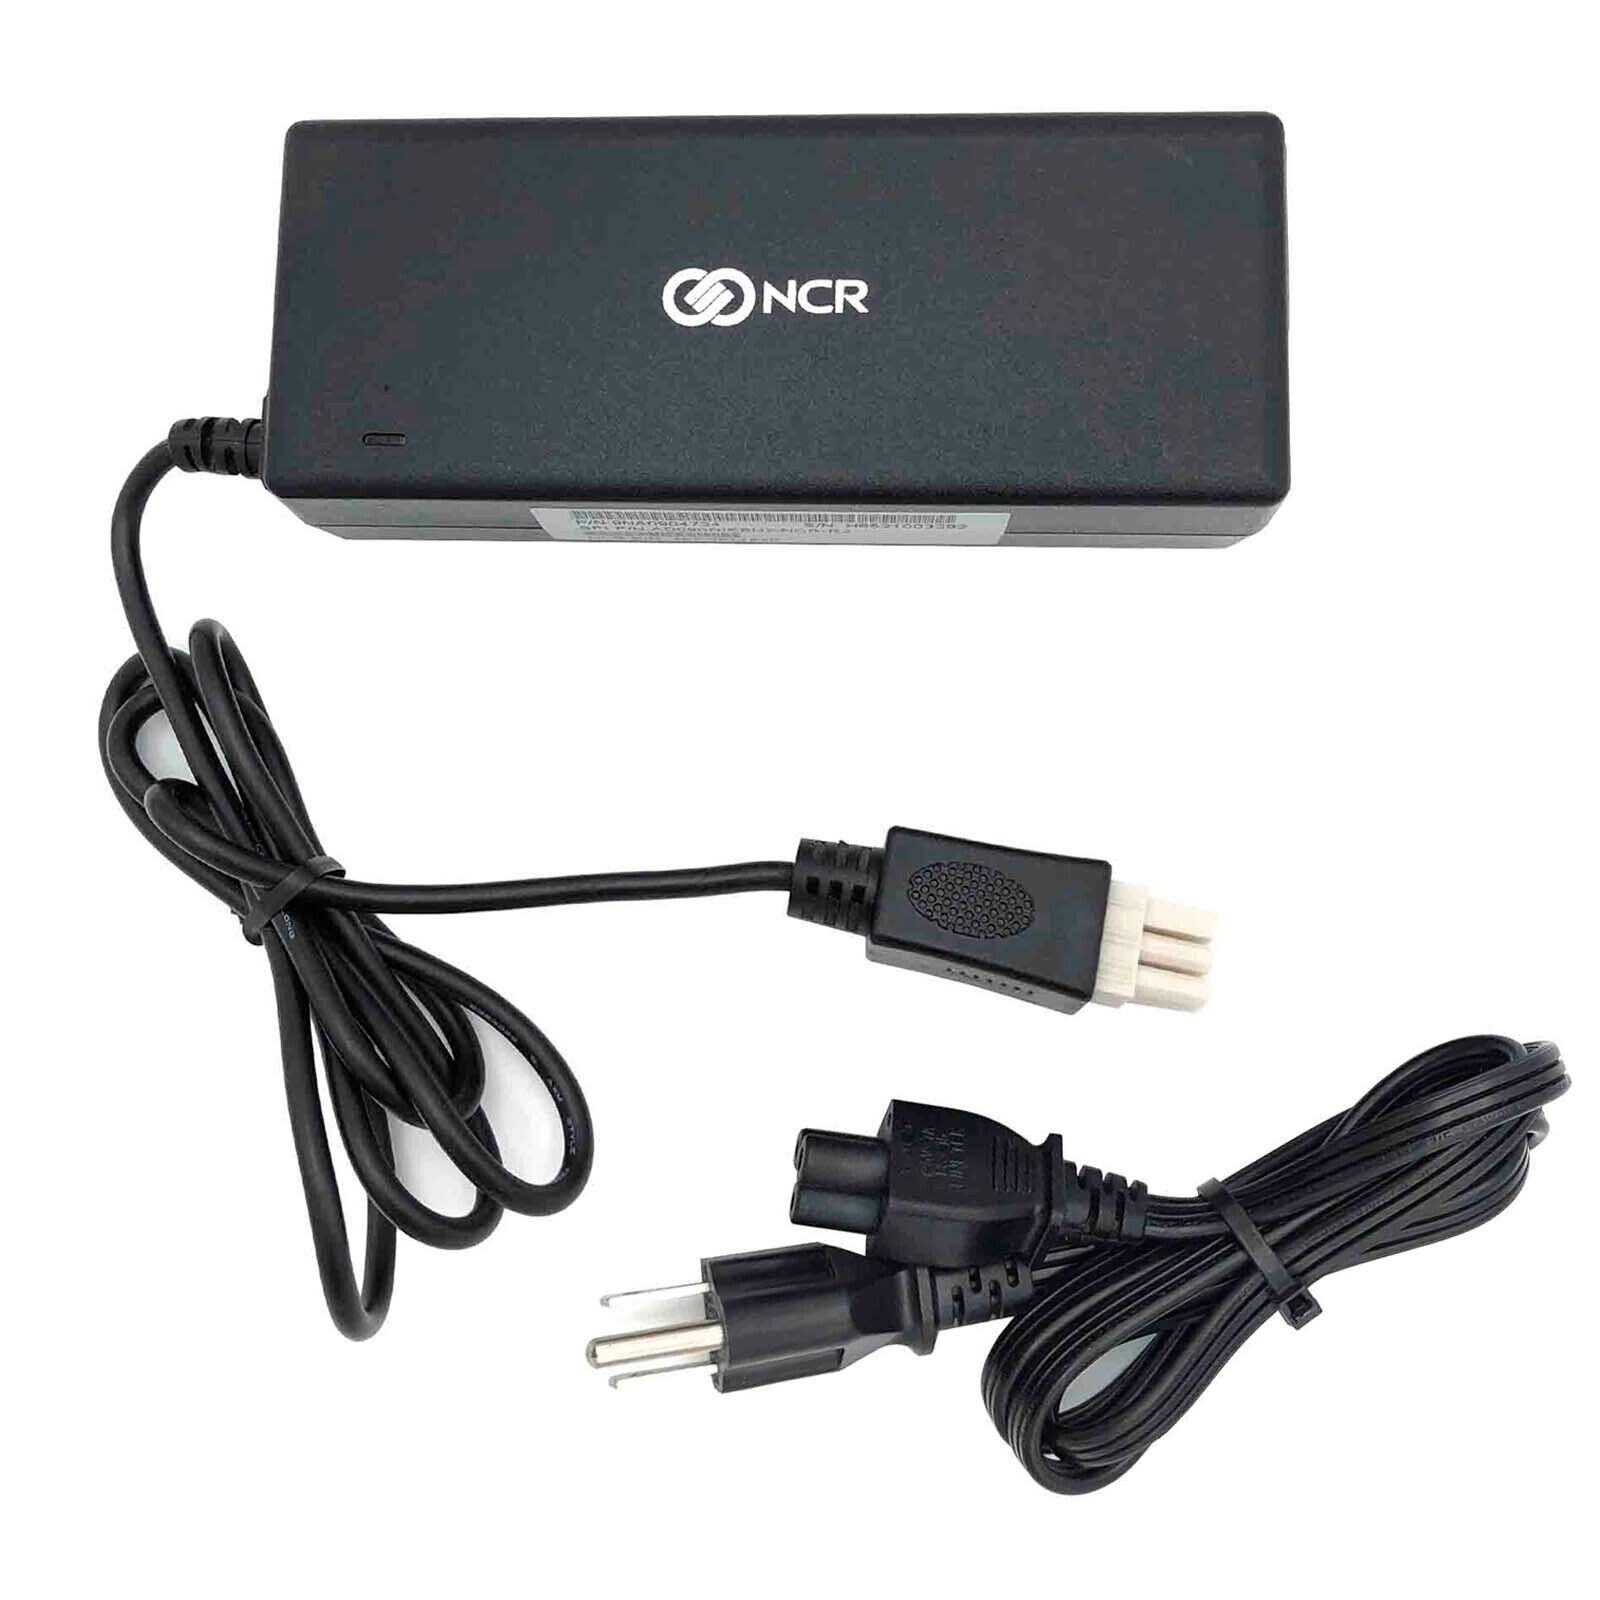 Genuine FSP Power Adapter for POS Touchscreen Terminal NCR 7754-0035-8801 w/PC Brand NCR Series NCR 7754-0035-8801 Mode - Click Image to Close